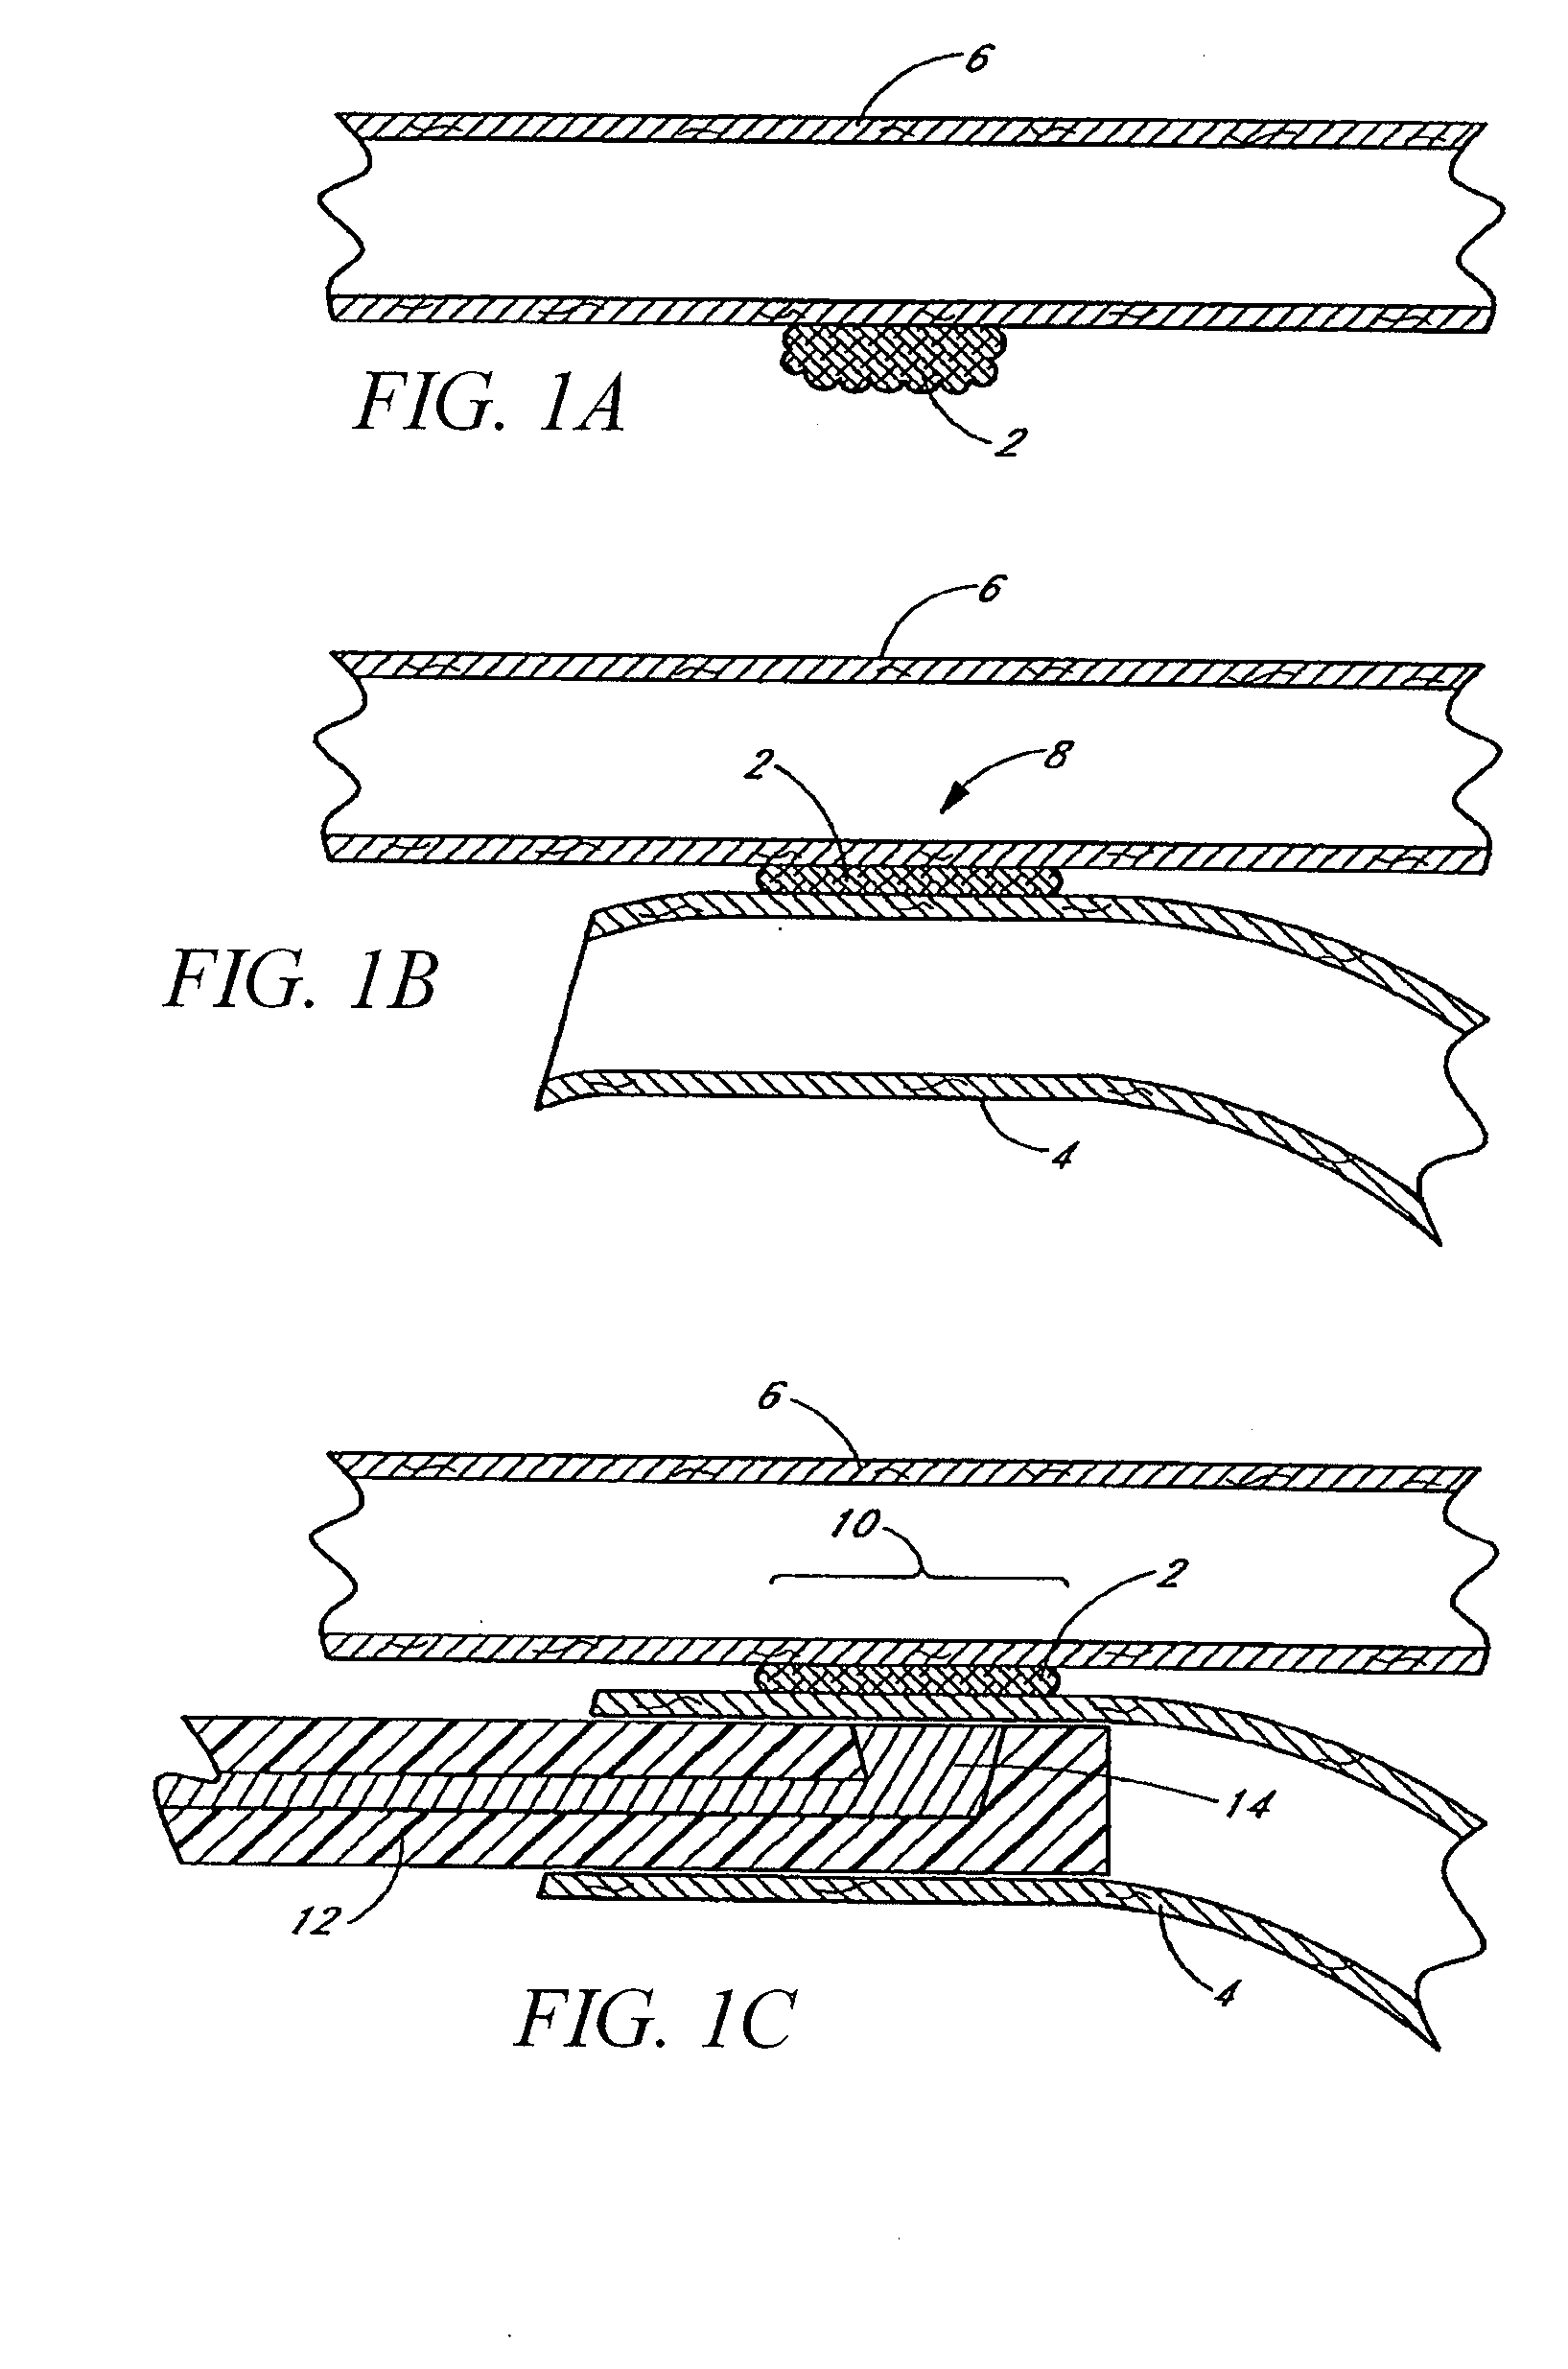 Apparatus and method for performing laser-assisted vascular anastomoses using bioglue